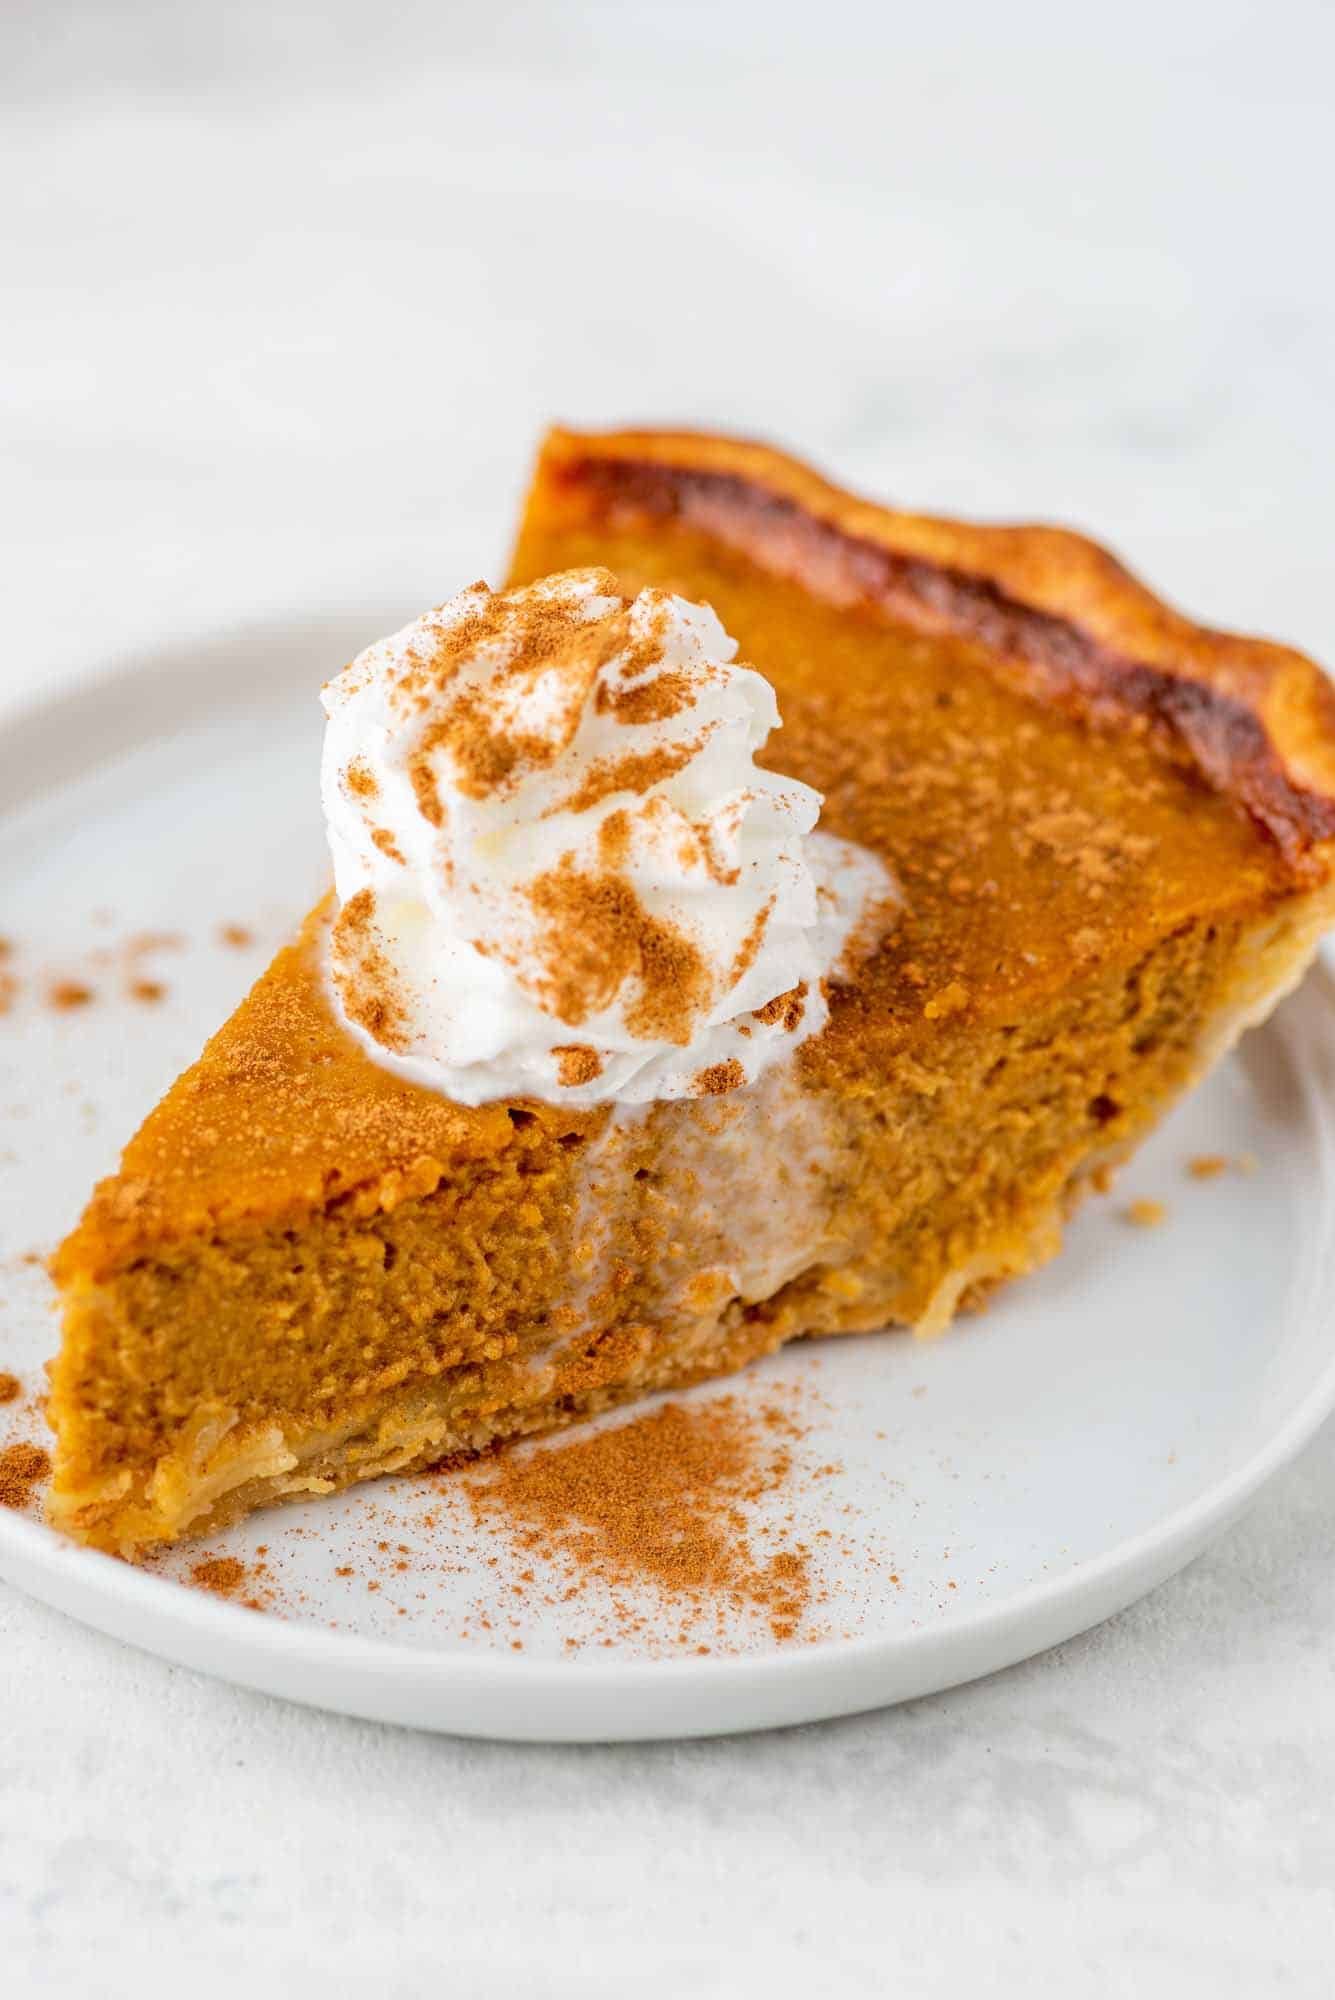 Slice of pumpkin pie on a white plate, topped with whipped cream and a sprinkling of ground cinnamon.